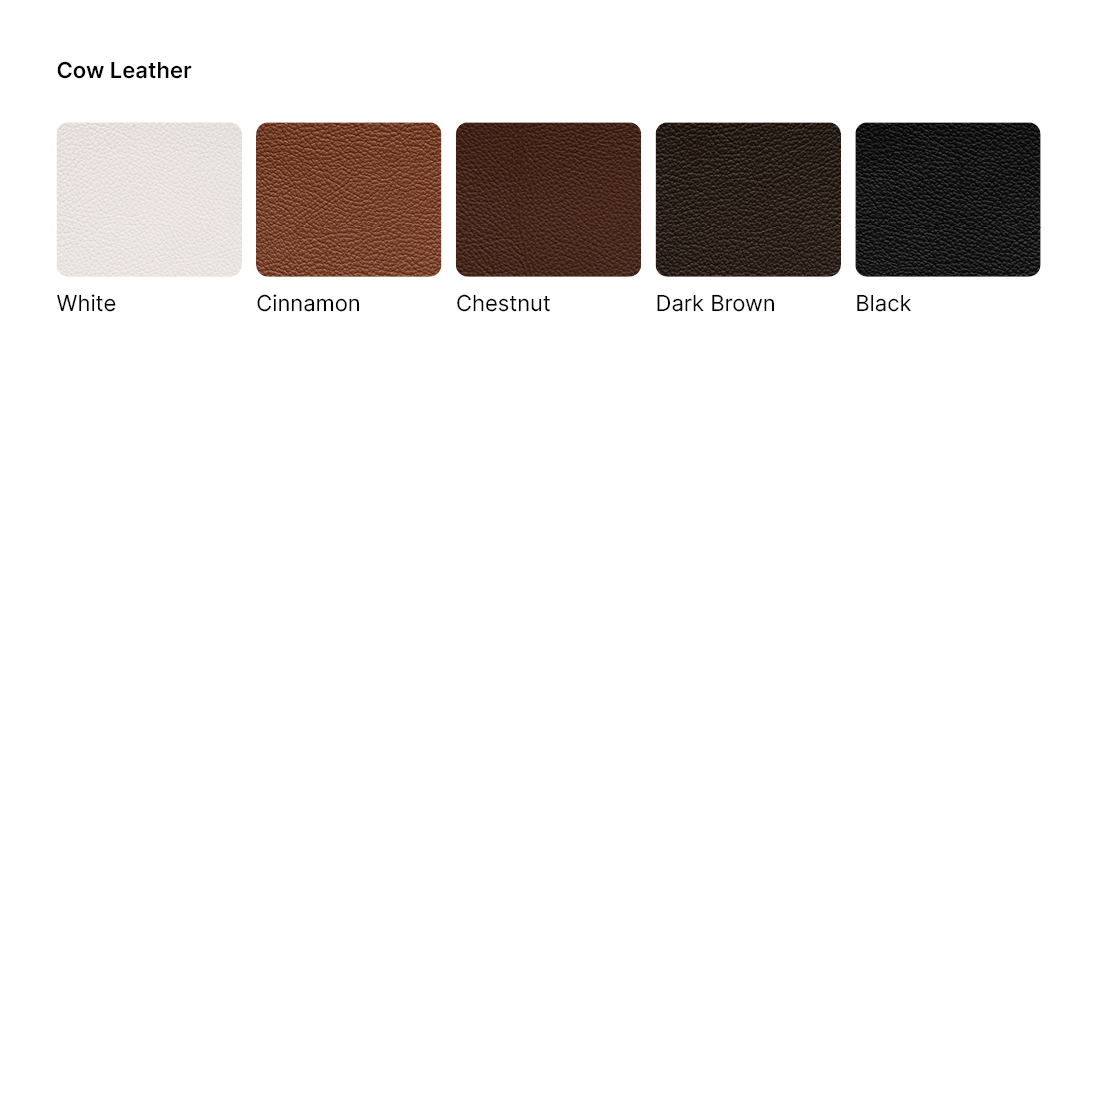 Cow Leather in 5 colors